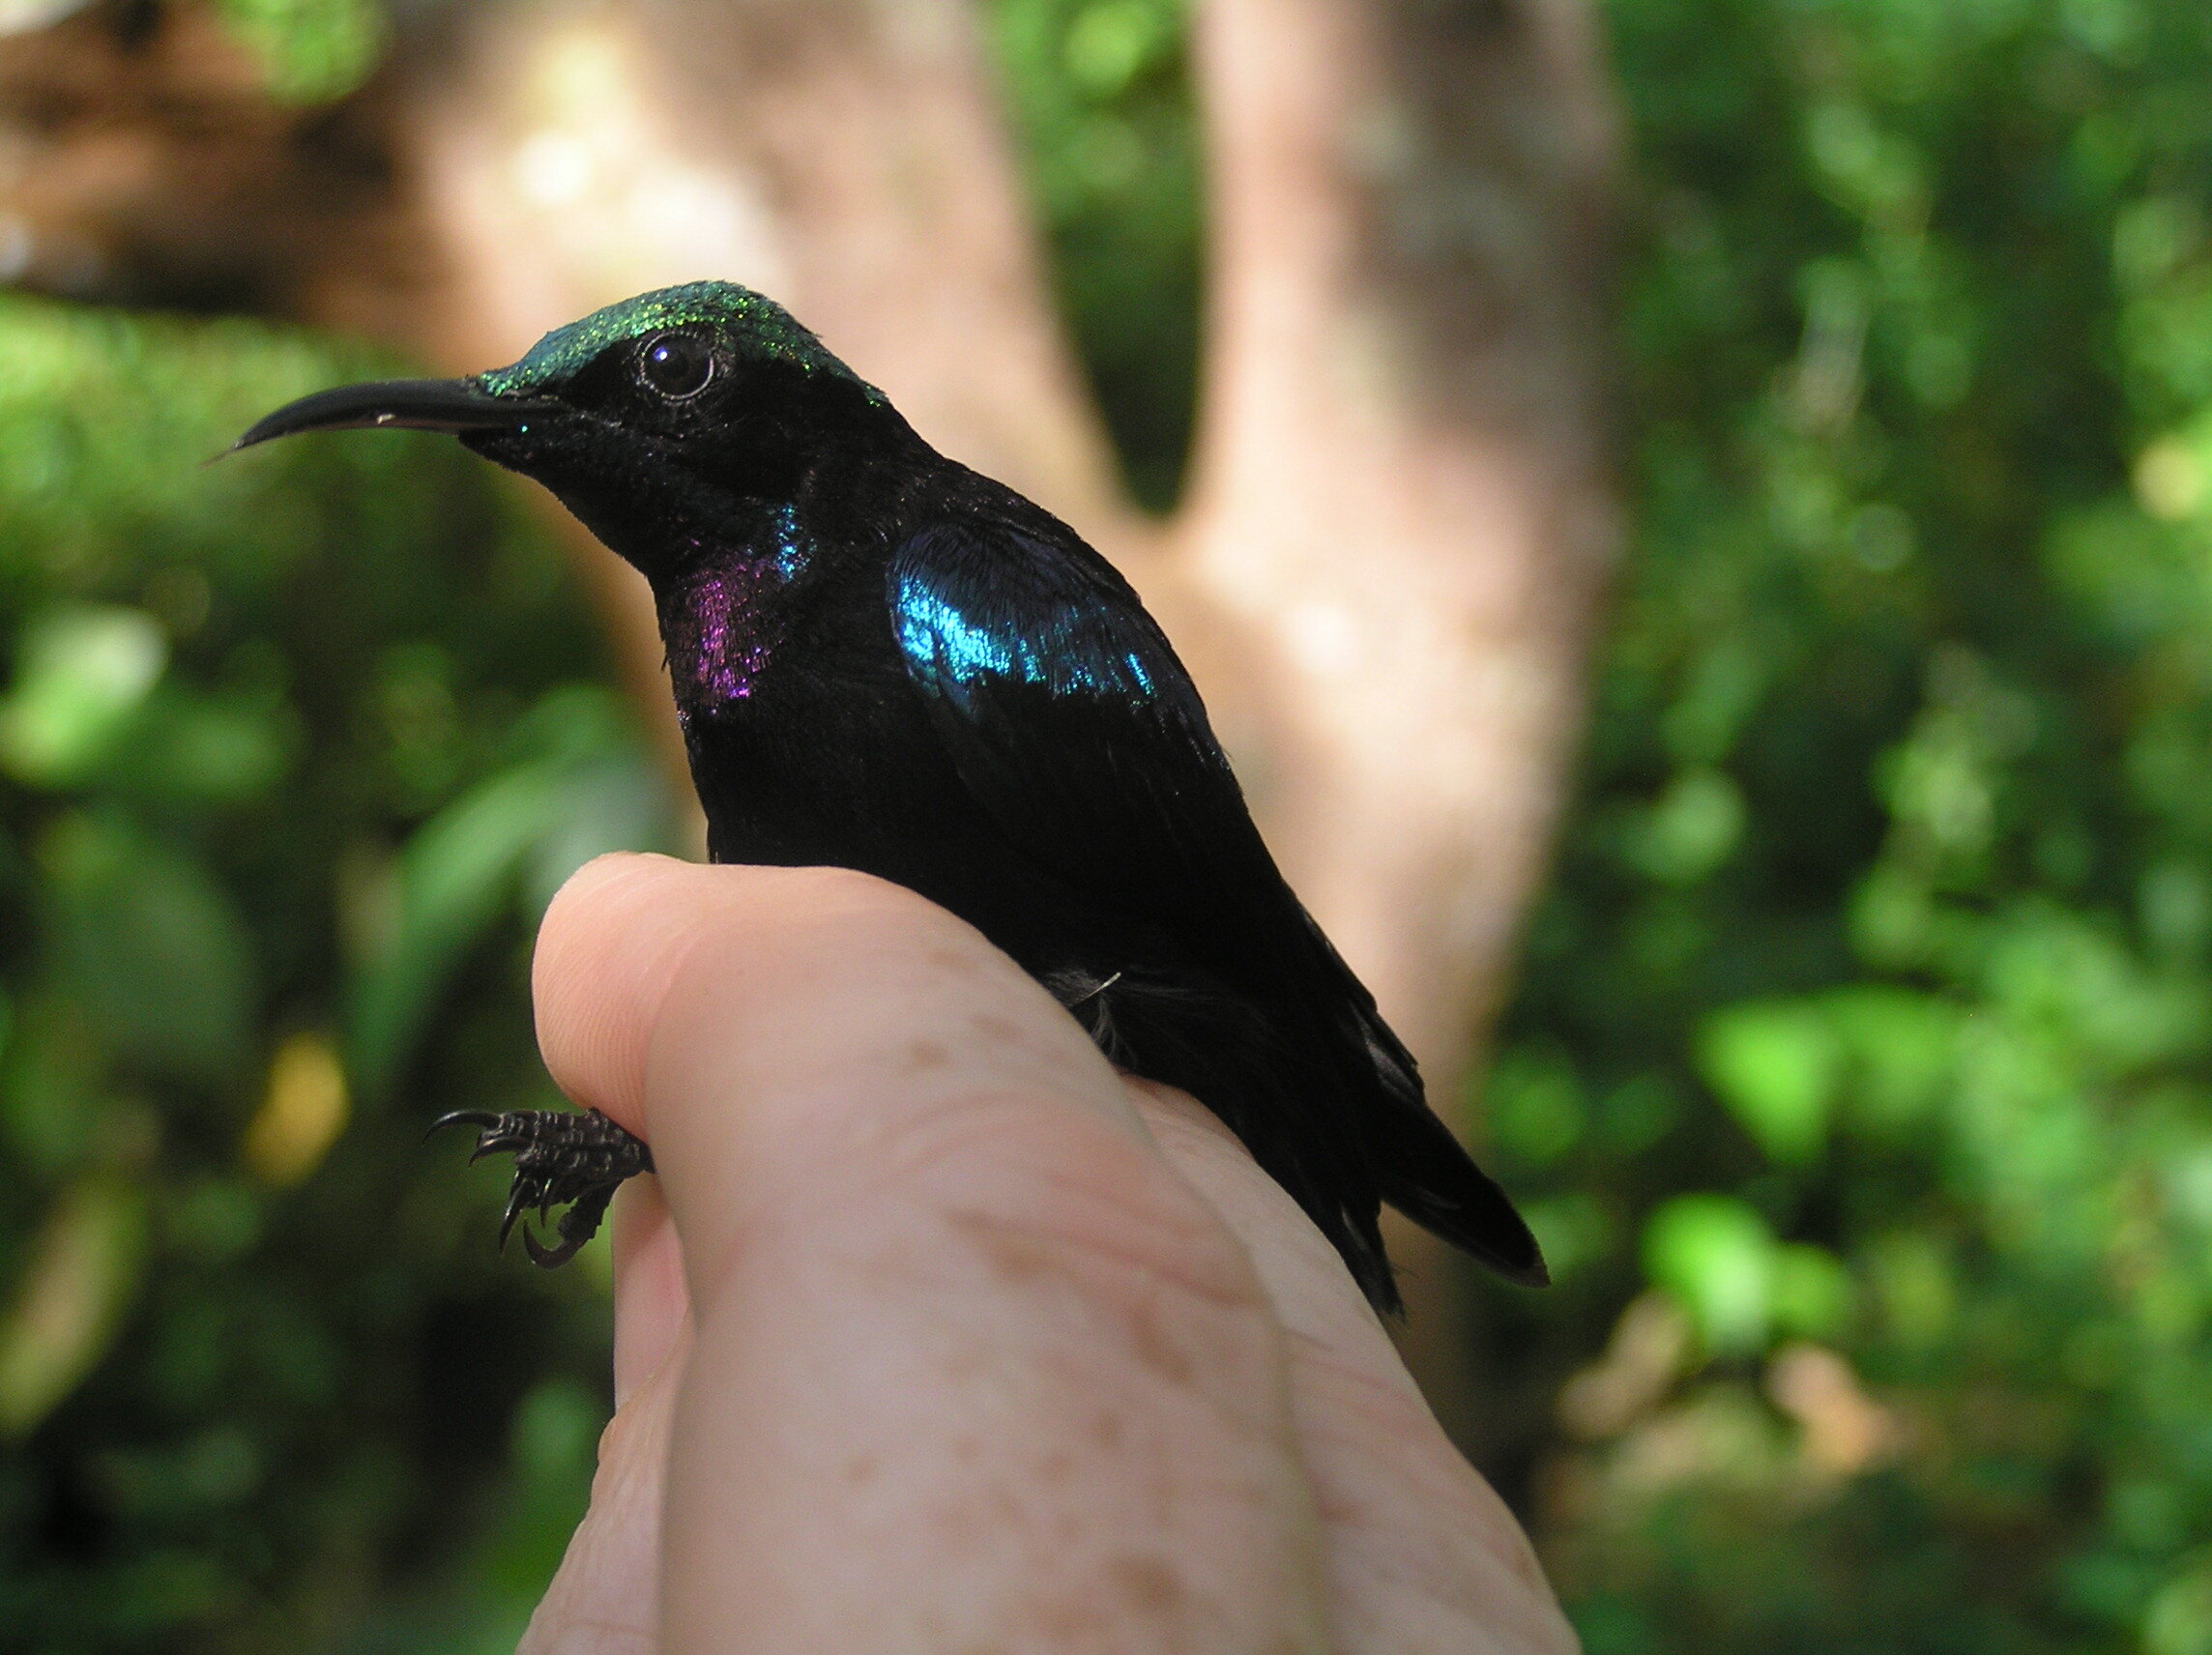 Several beautiful new bird species found on remote Indonesian islands